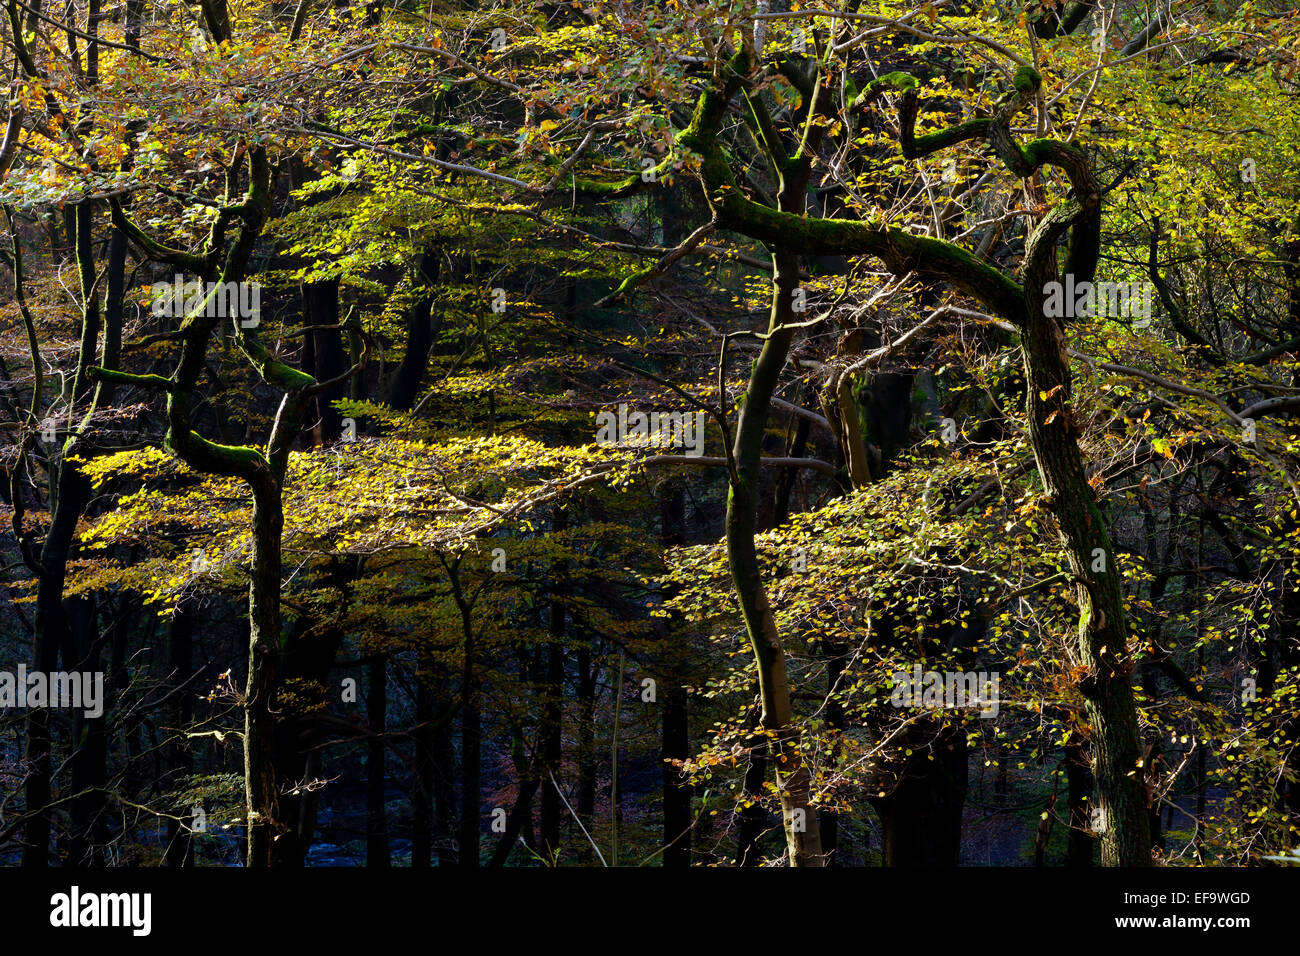 Autumn at Hardcastle Crags a wooded valley near Hebden Bridge in West Yorkshire England UK Stock Photo